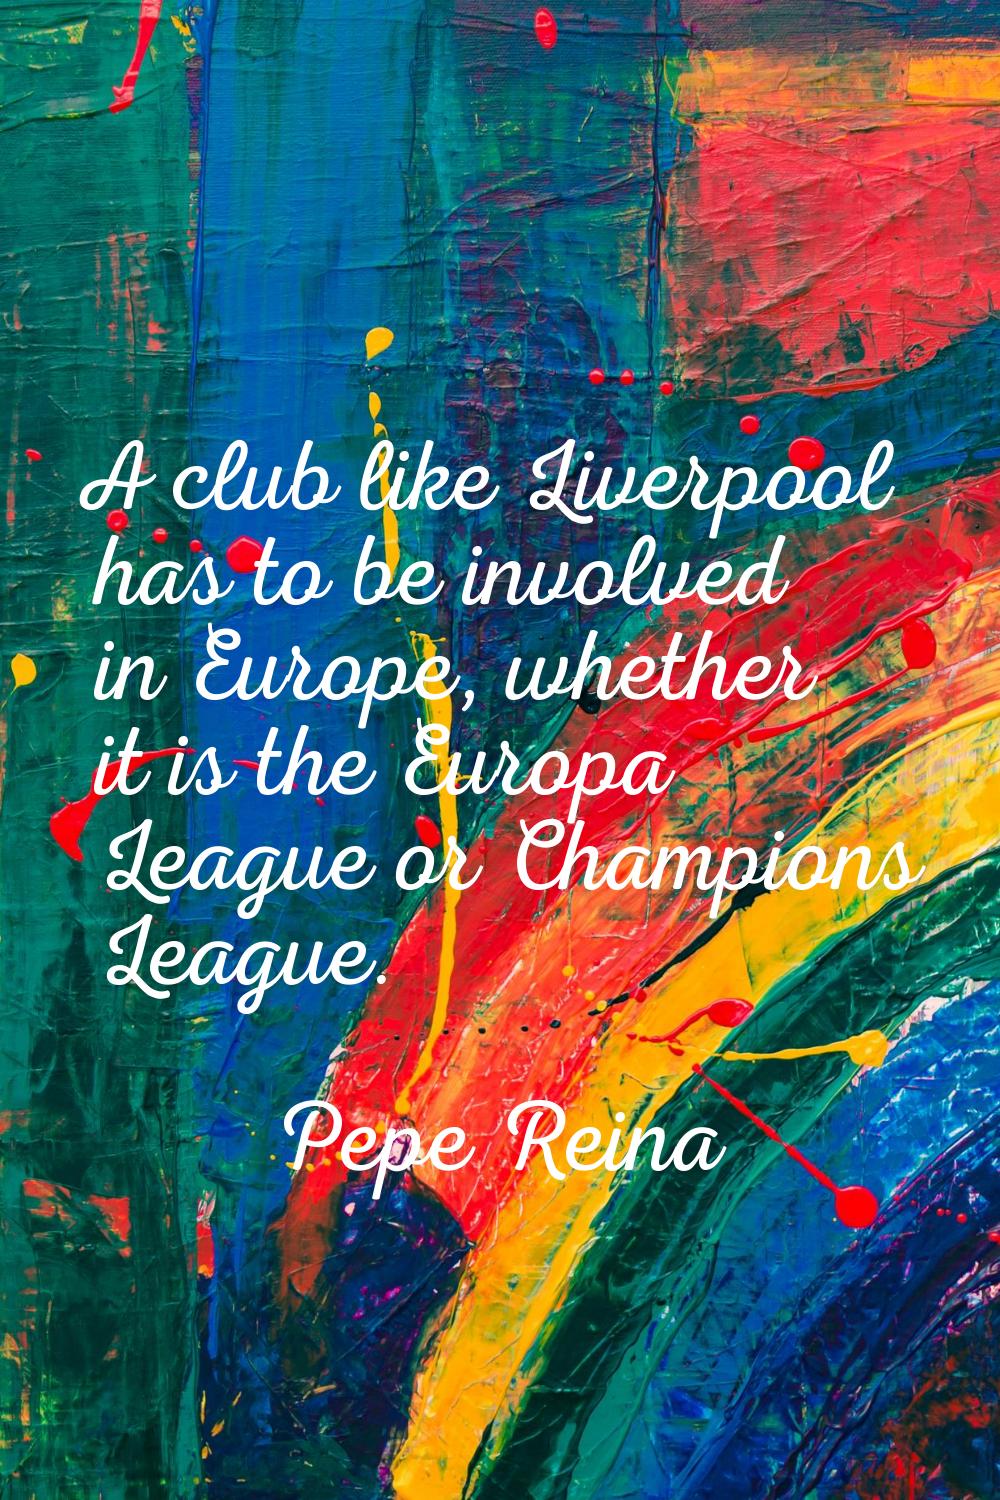 A club like Liverpool has to be involved in Europe, whether it is the Europa League or Champions Le